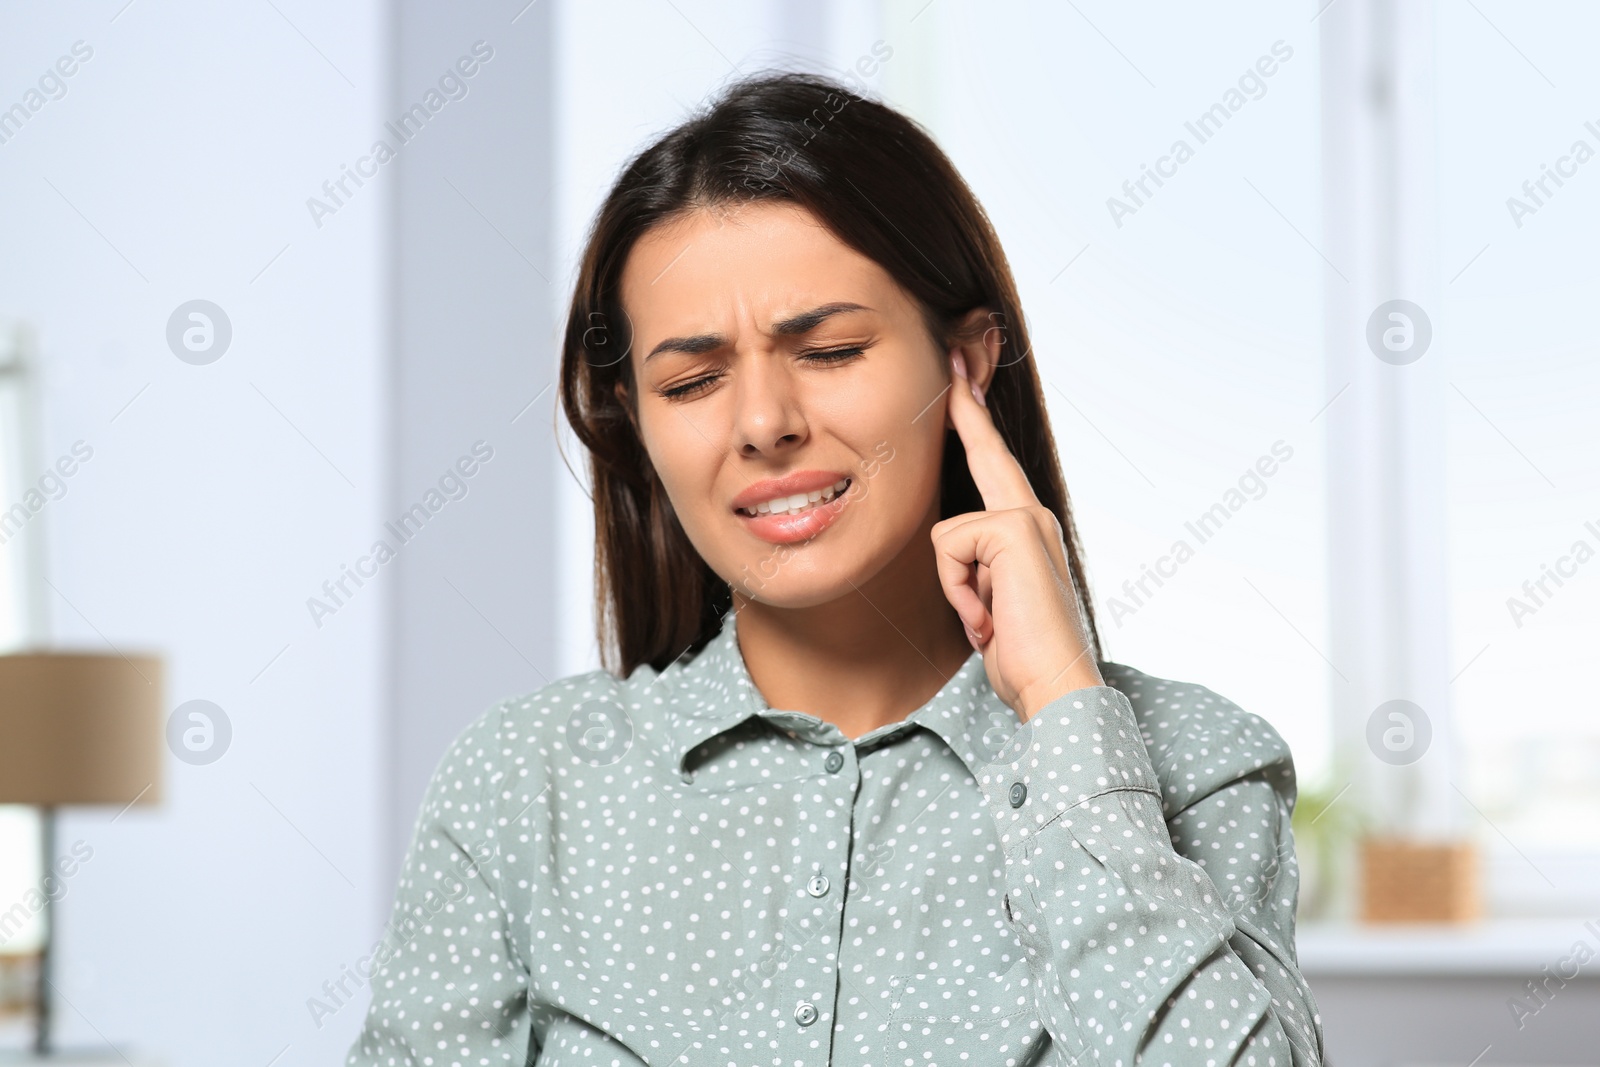 Photo of Young woman suffering from ear pain indoors